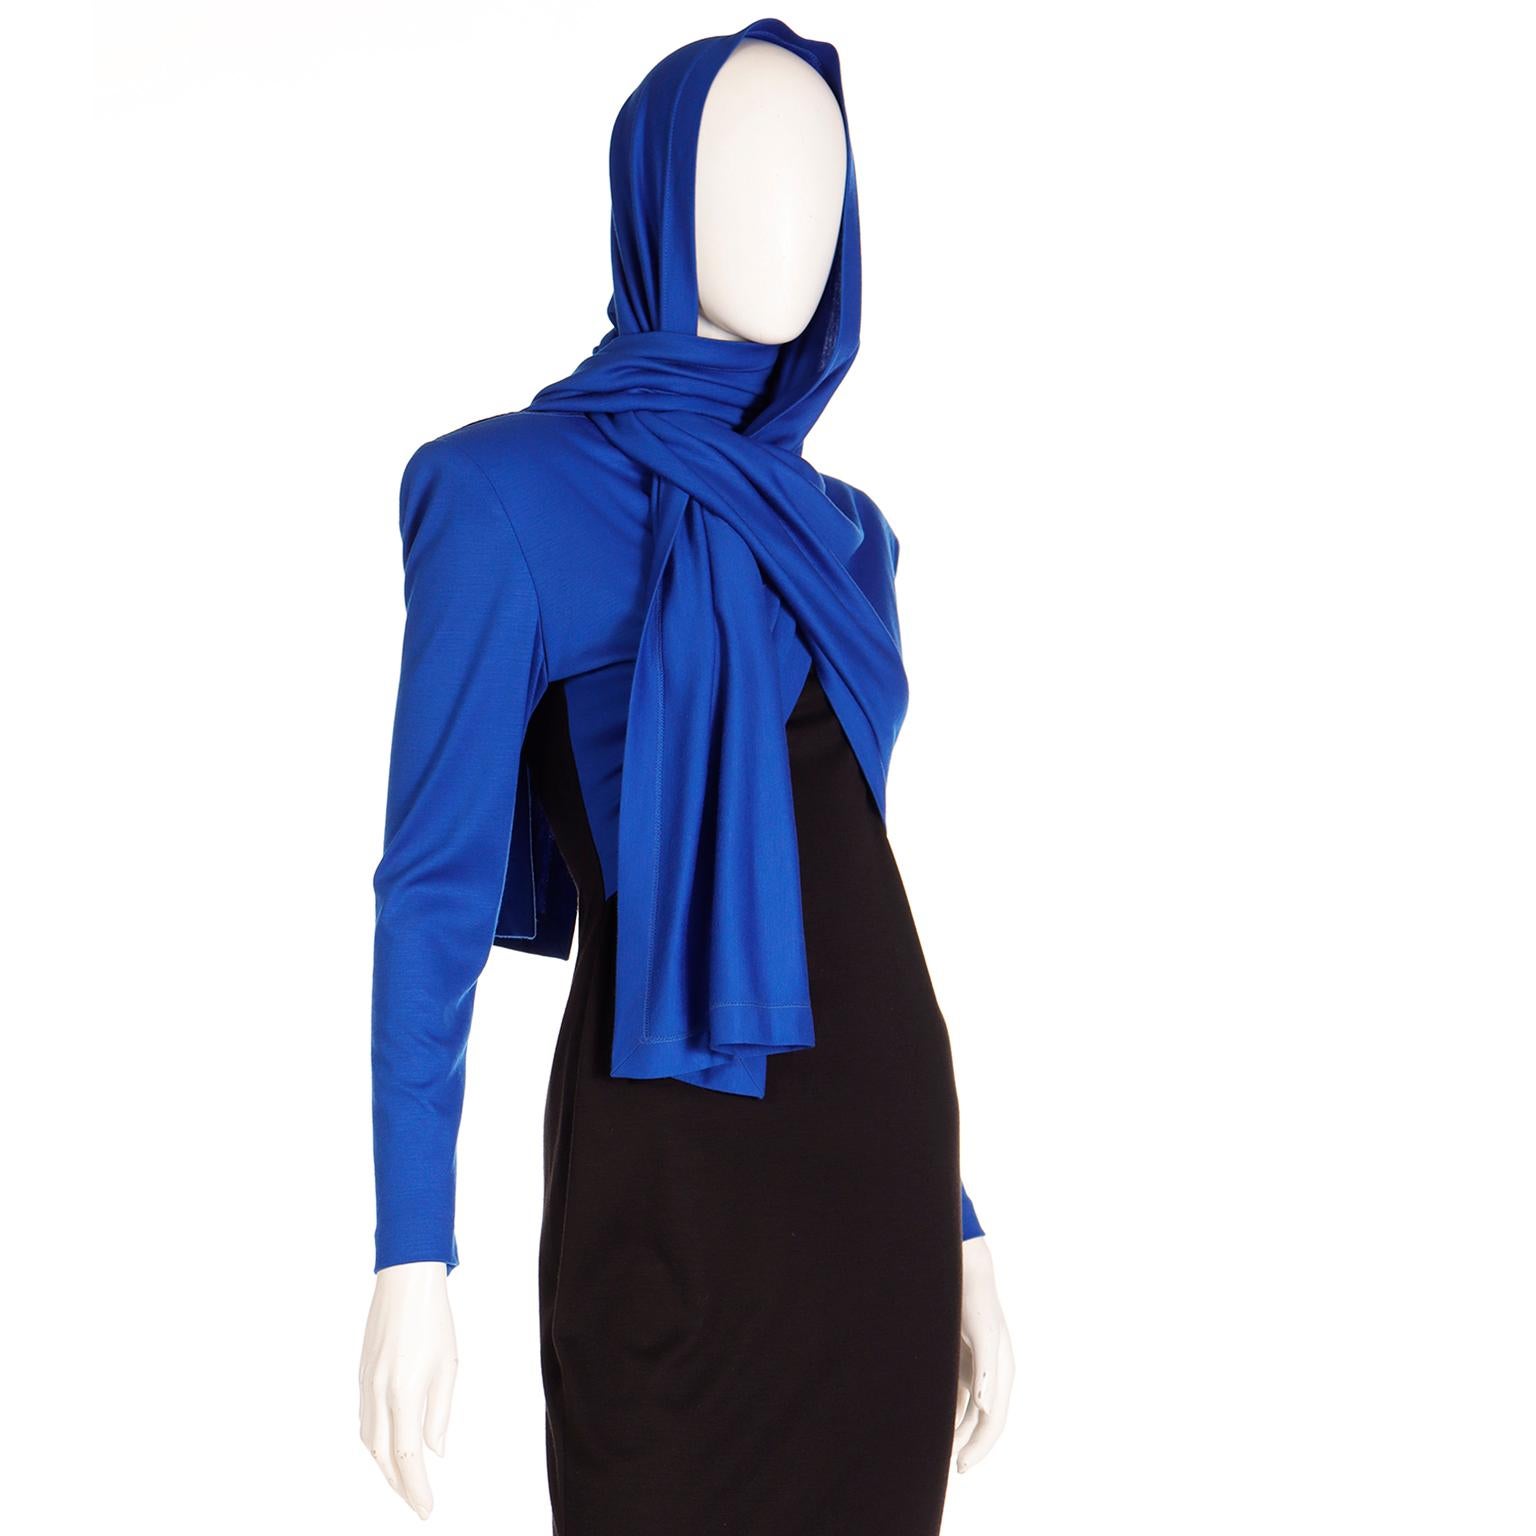 FW 1989 Patrick Kelly Runway Dress in Blue & Black Knit with Head Scarf  For Sale 13